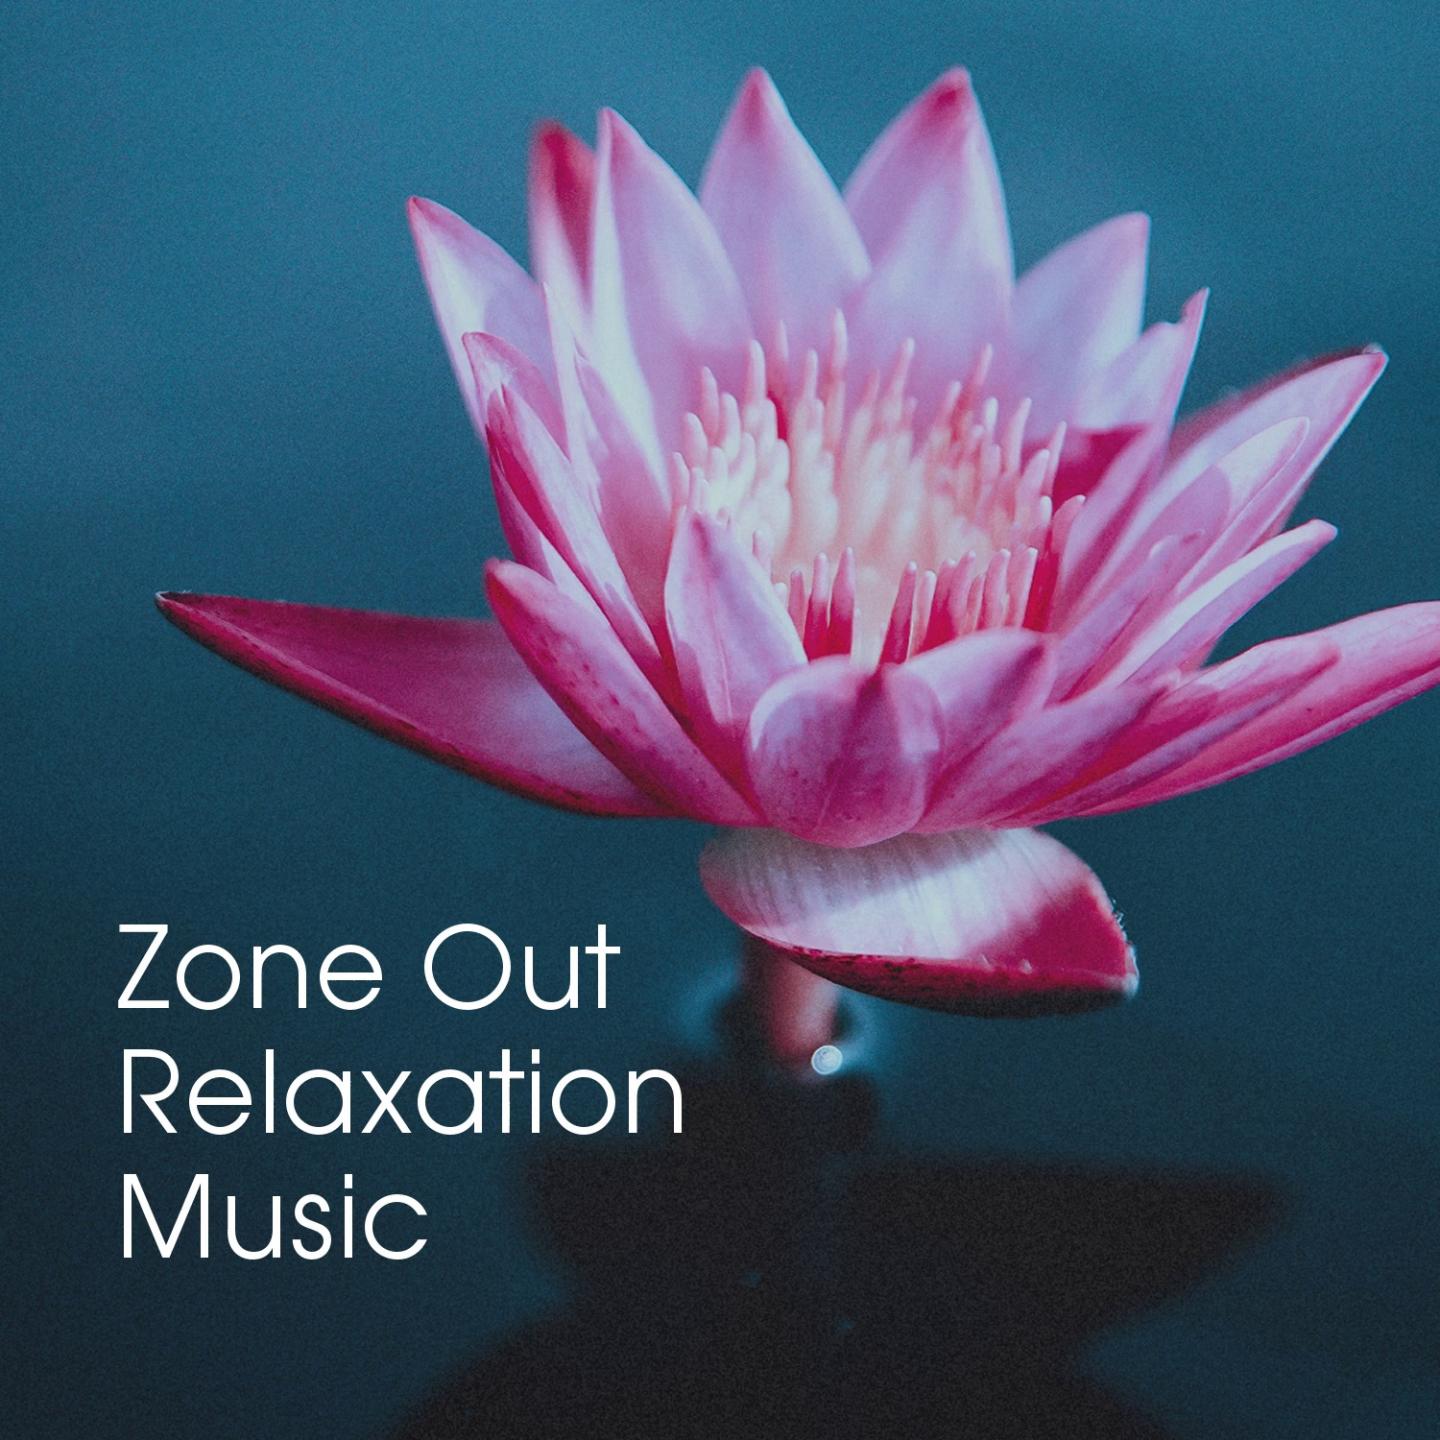 Zone out Relaxation Music